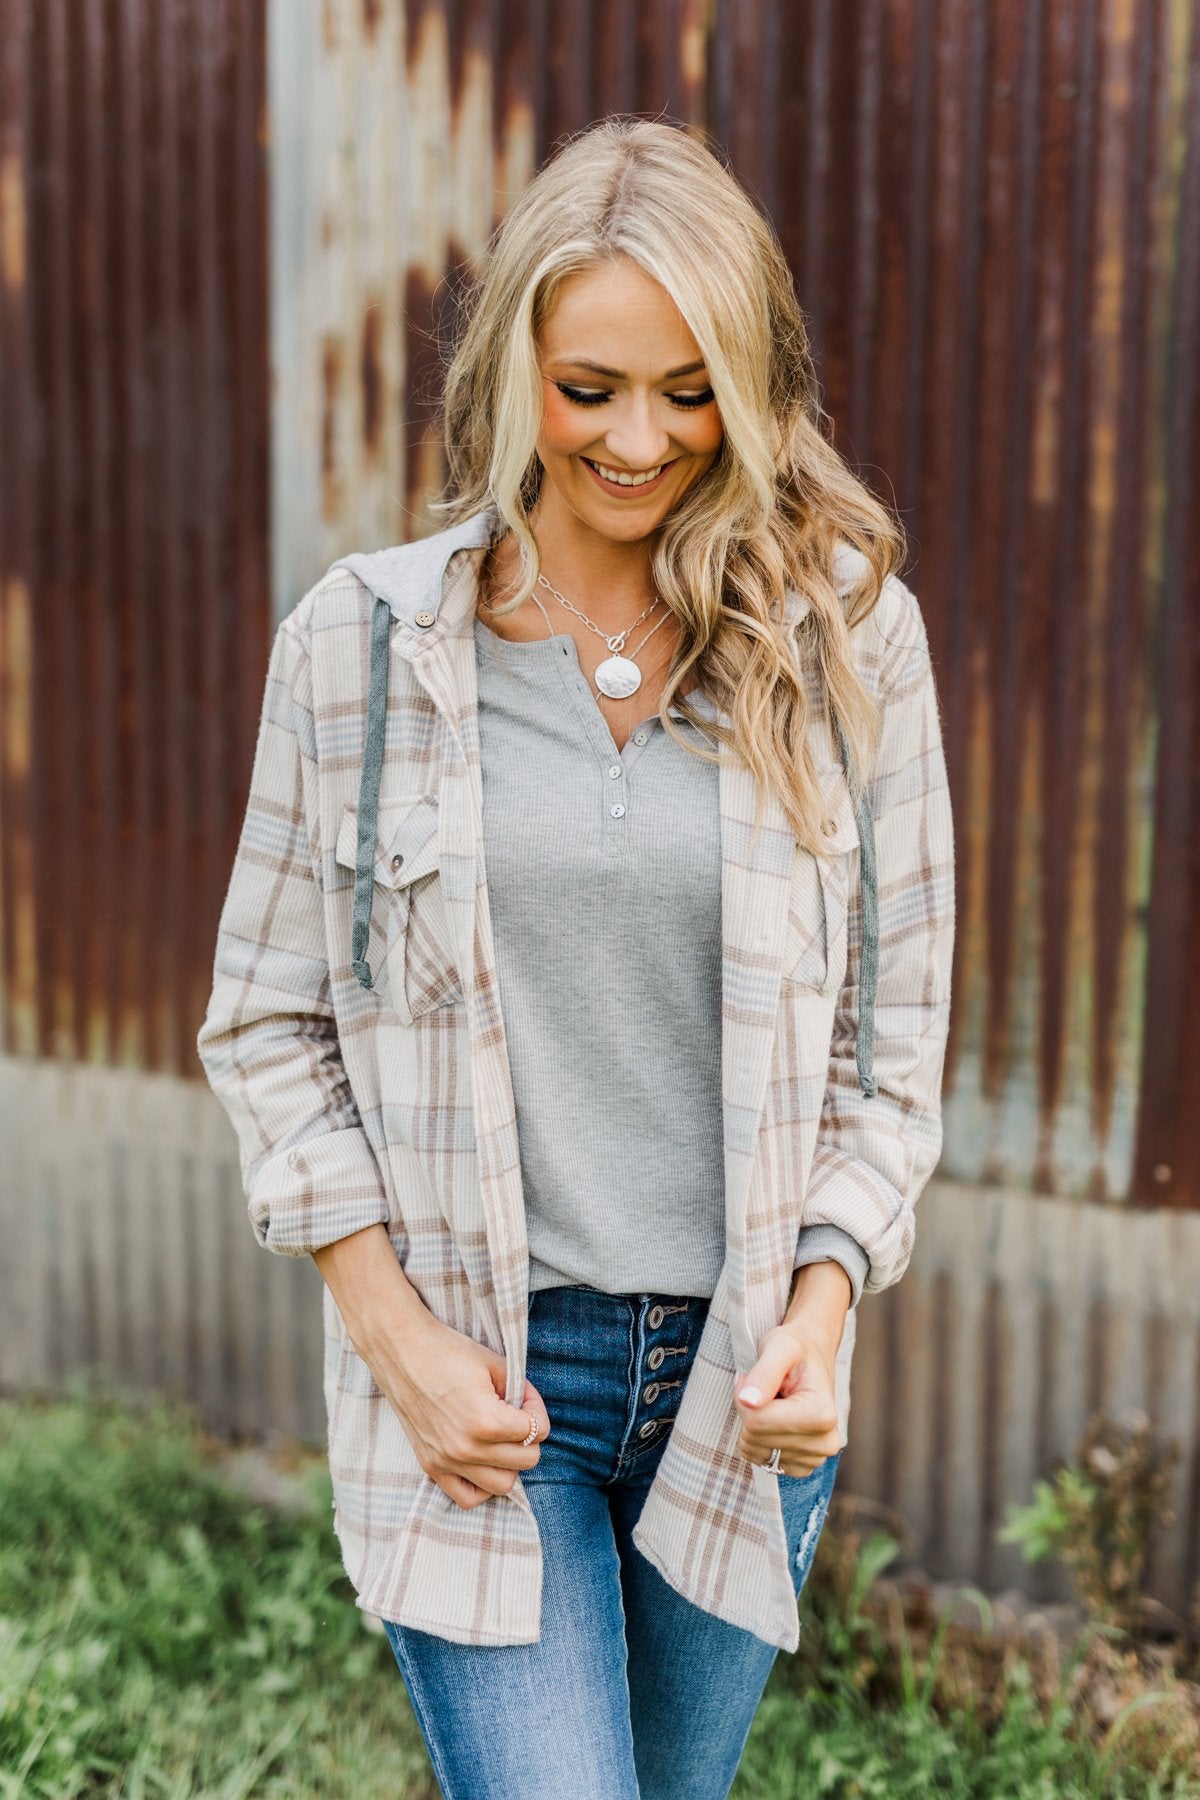 Autumn Is Calling Hooded Plaid Top- Oatmeal, Taupe, & Blue